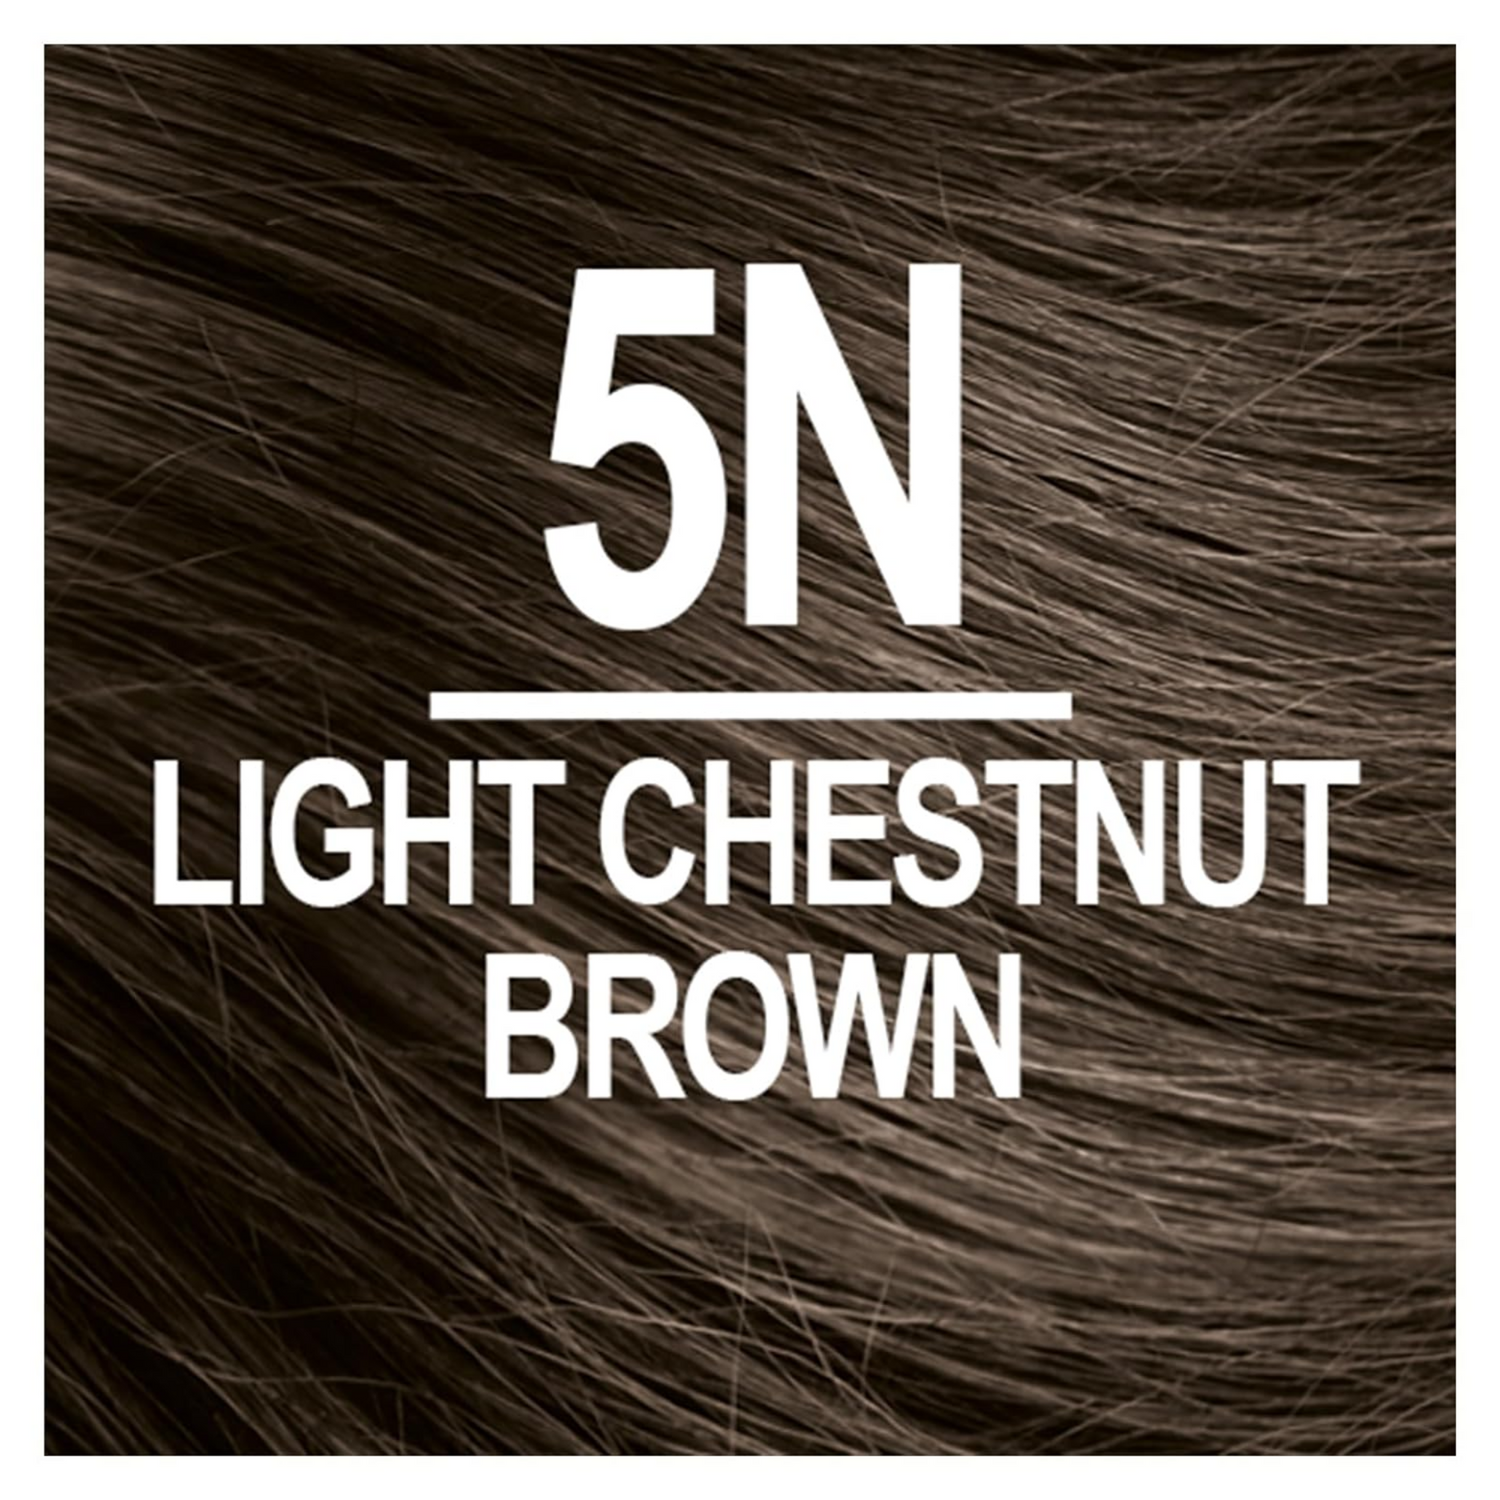 Naturtint Permanent Hair Color 5N Light Chestnut Brown (Pack of 6)